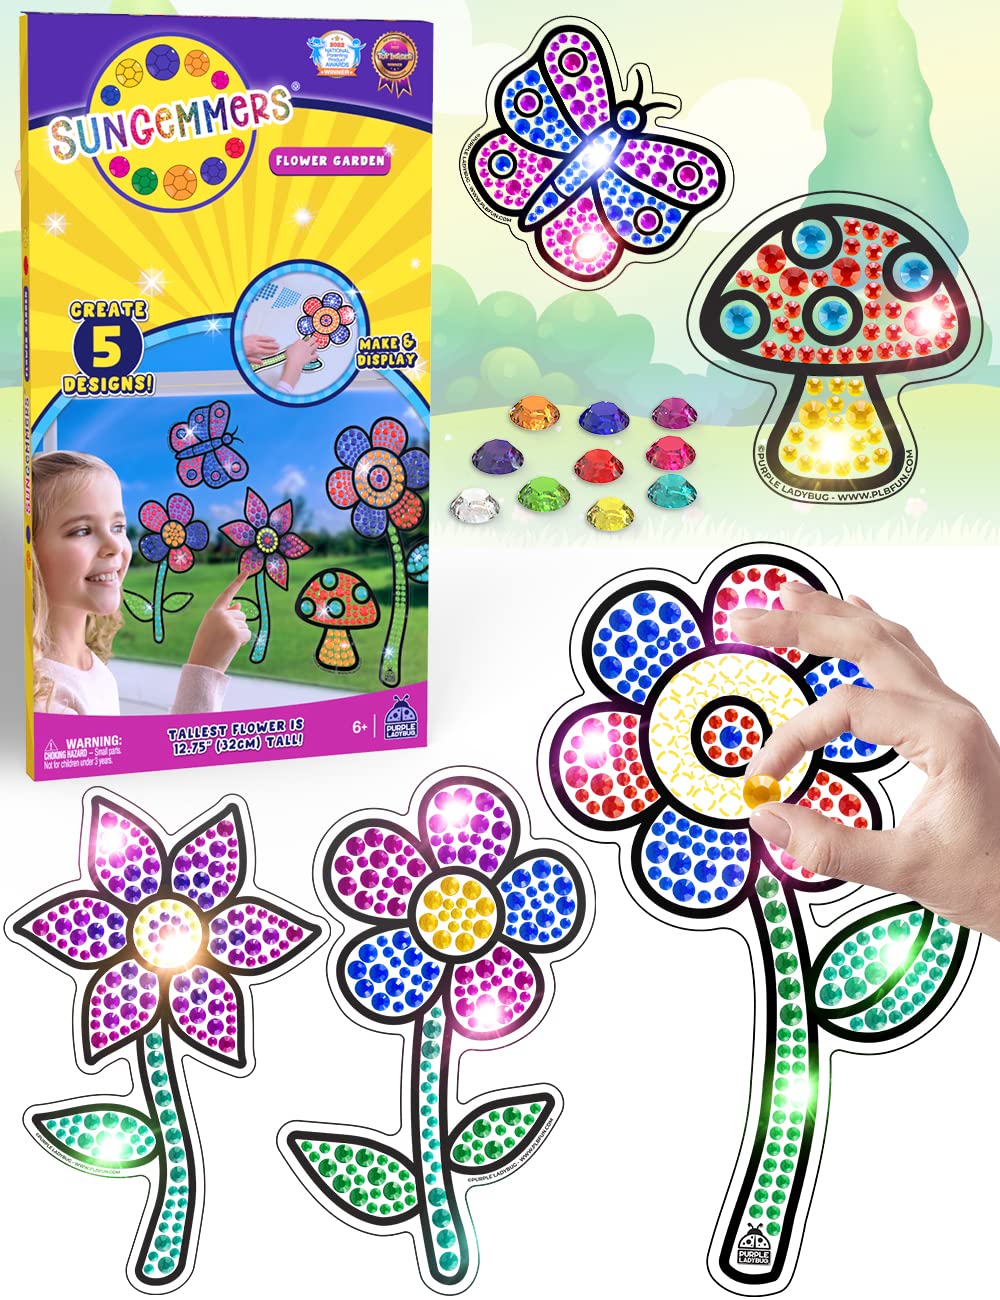 jacraftne Arts and Crafts for Kids Ages 8-12 - Crafts for Girls Ages 8-12 - 6pcs Window Gem Art Suncatcher Kits - Birthday Gifts for 4